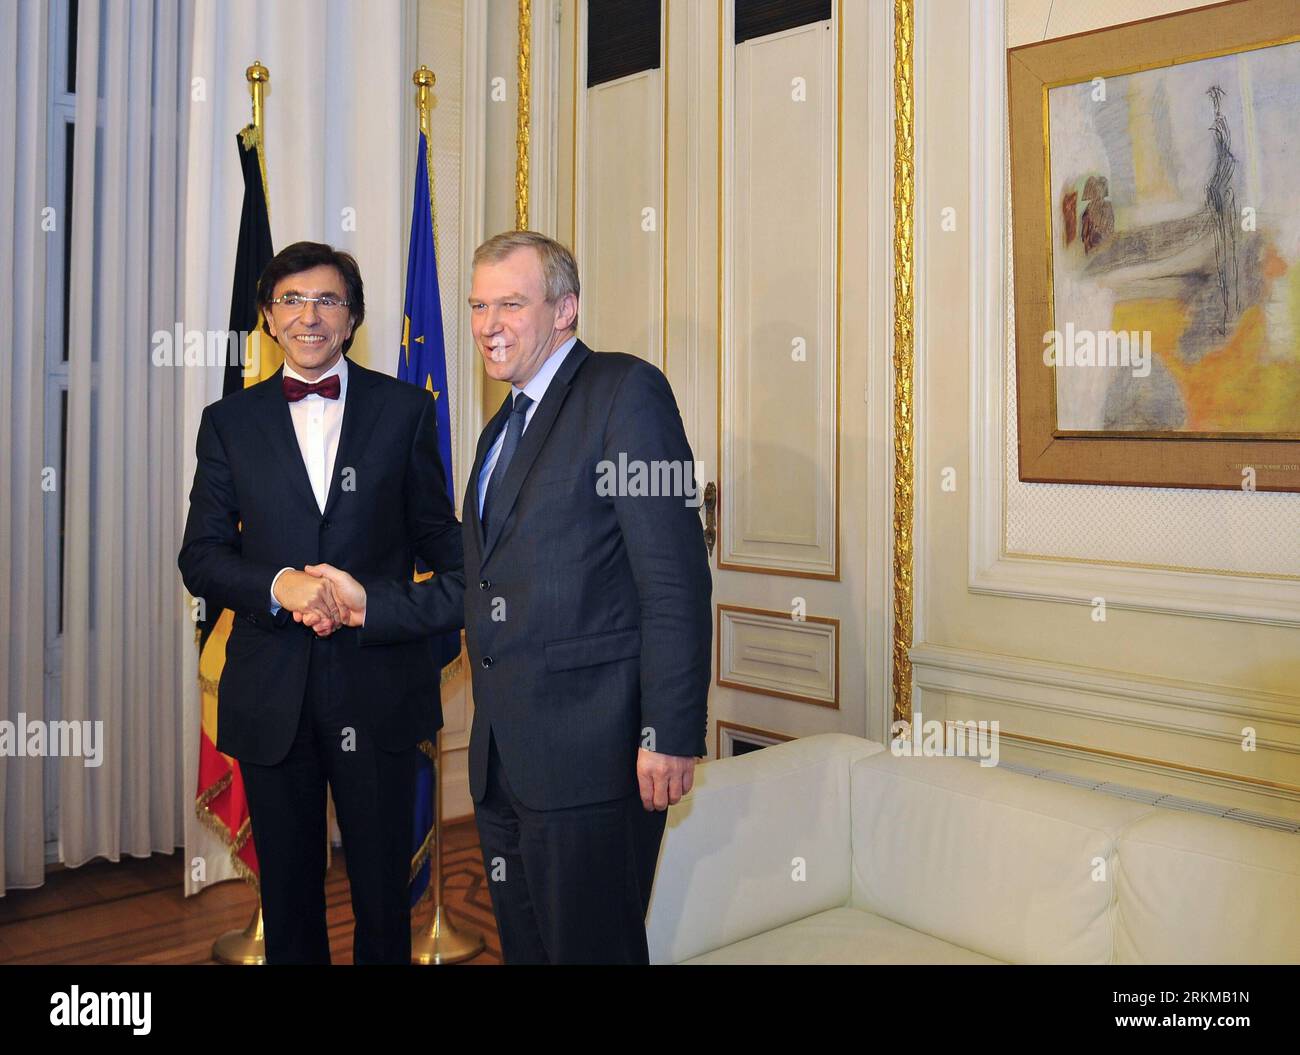 Bildnummer: 56651941  Datum: 06.12.2011  Copyright: imago/Xinhua (111206) -- BRUSSELS, Dec. 6, 2011 (Xinhua) -- Belgian new Prime Minister Elio Di Rupo (L) shakes hands with outgoing Prime Minister Yves Leterme at the Prime Minister s residence in Brussels, capital of Belgium, Dec. 6, 2011. The inauguration of the new government marked the ending of a record 18-months long political deadlock of Belgium. (Xinhua/Ye Pingfan) (ypf) BELGIUM-BRUSSELS-NEW GOVERNMENT PUBLICATIONxNOTxINxCHN People Politik neue Regierung Belgien x0x xtm 2011 quer      56651941 Date 06 12 2011 Copyright Imago XINHUA  Br Stock Photo